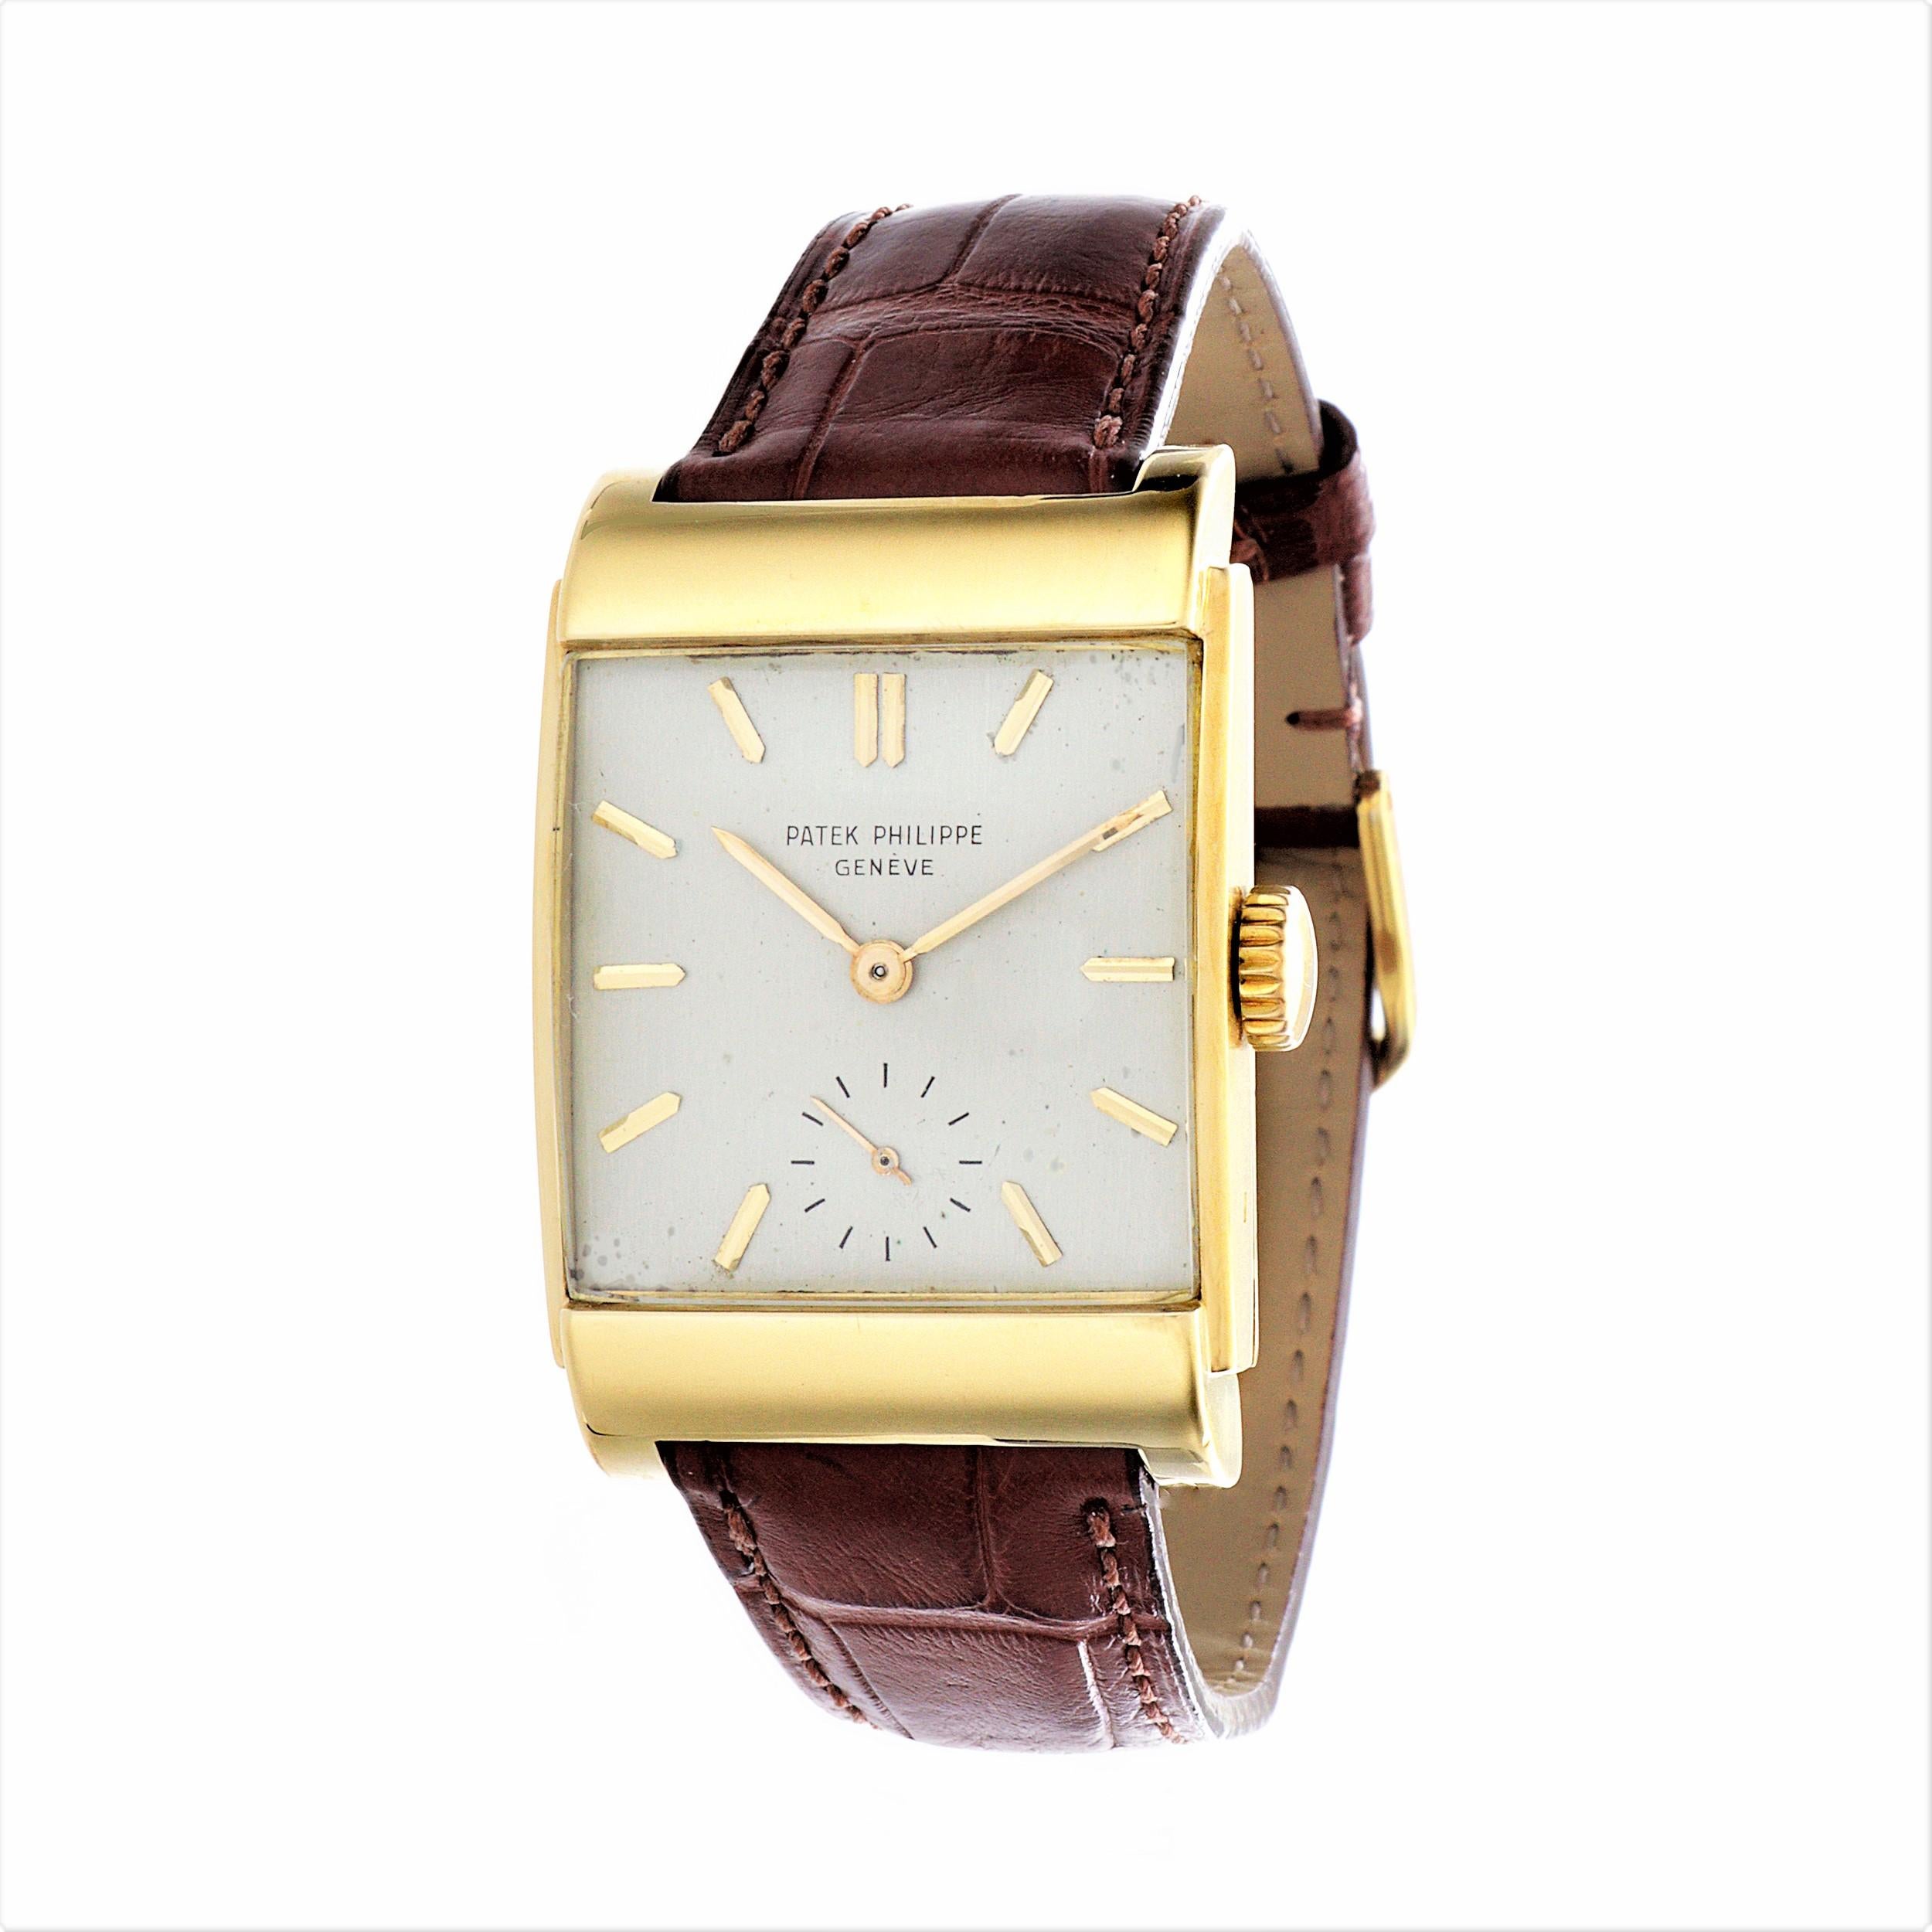 Patek Philippe 2479J Curved Domed Rectangular Watch with Stepped Case Circa 1950 For Sale 4